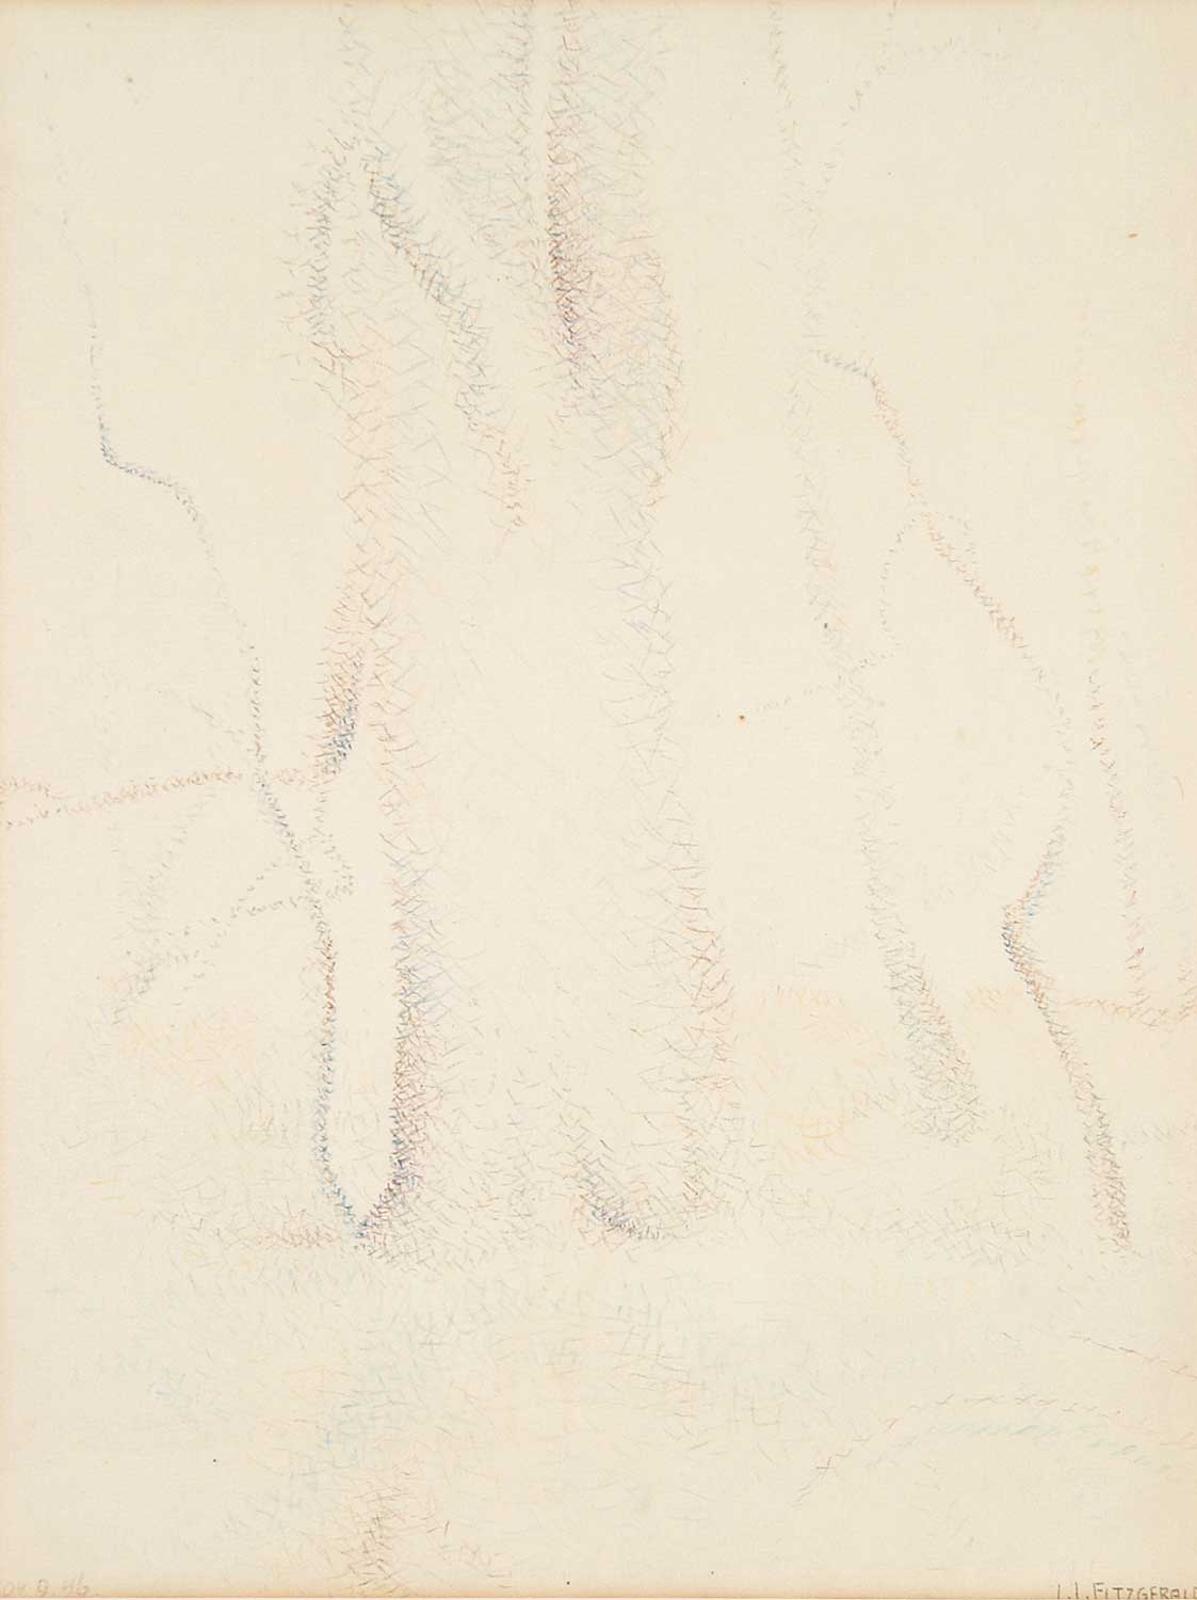 Lionel Lemoine FitzGerald (1890-1956) - Untitled - Abstract Trees